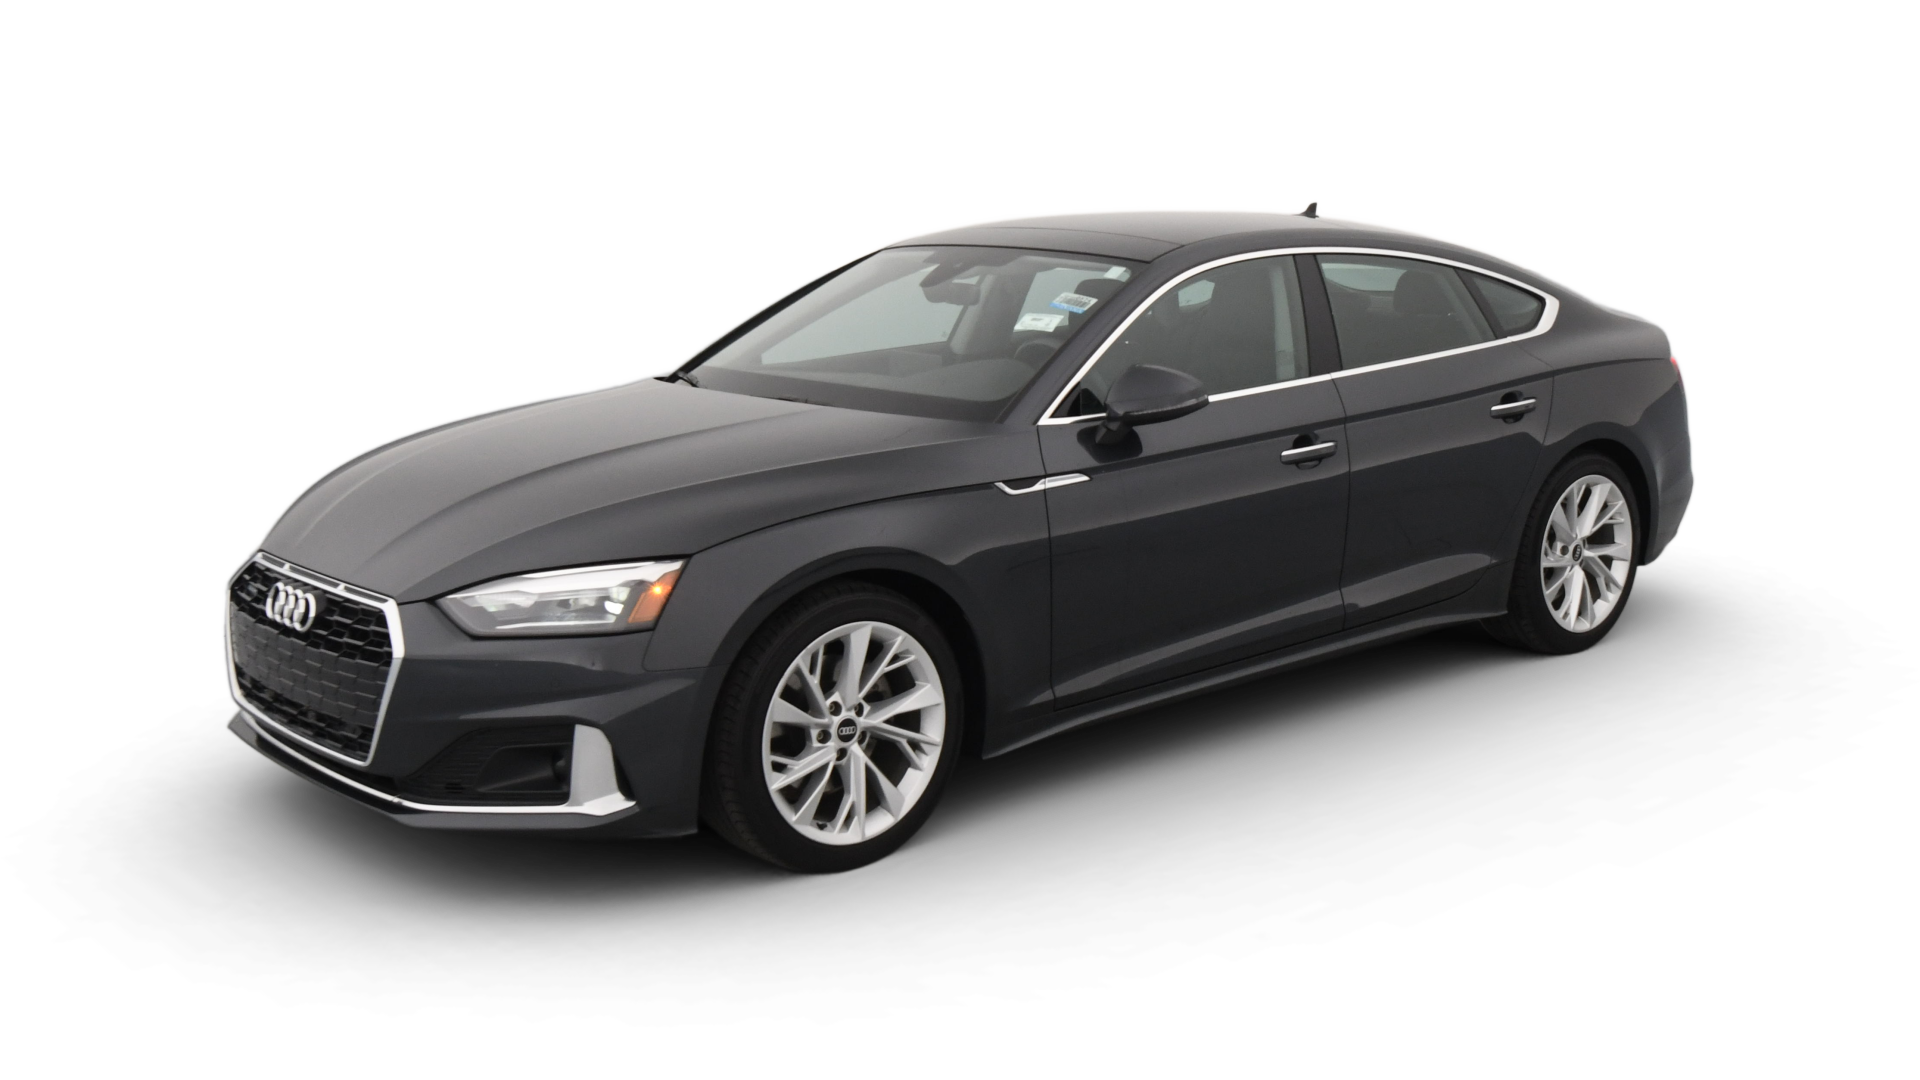 Used Audi A5 for Sale Online